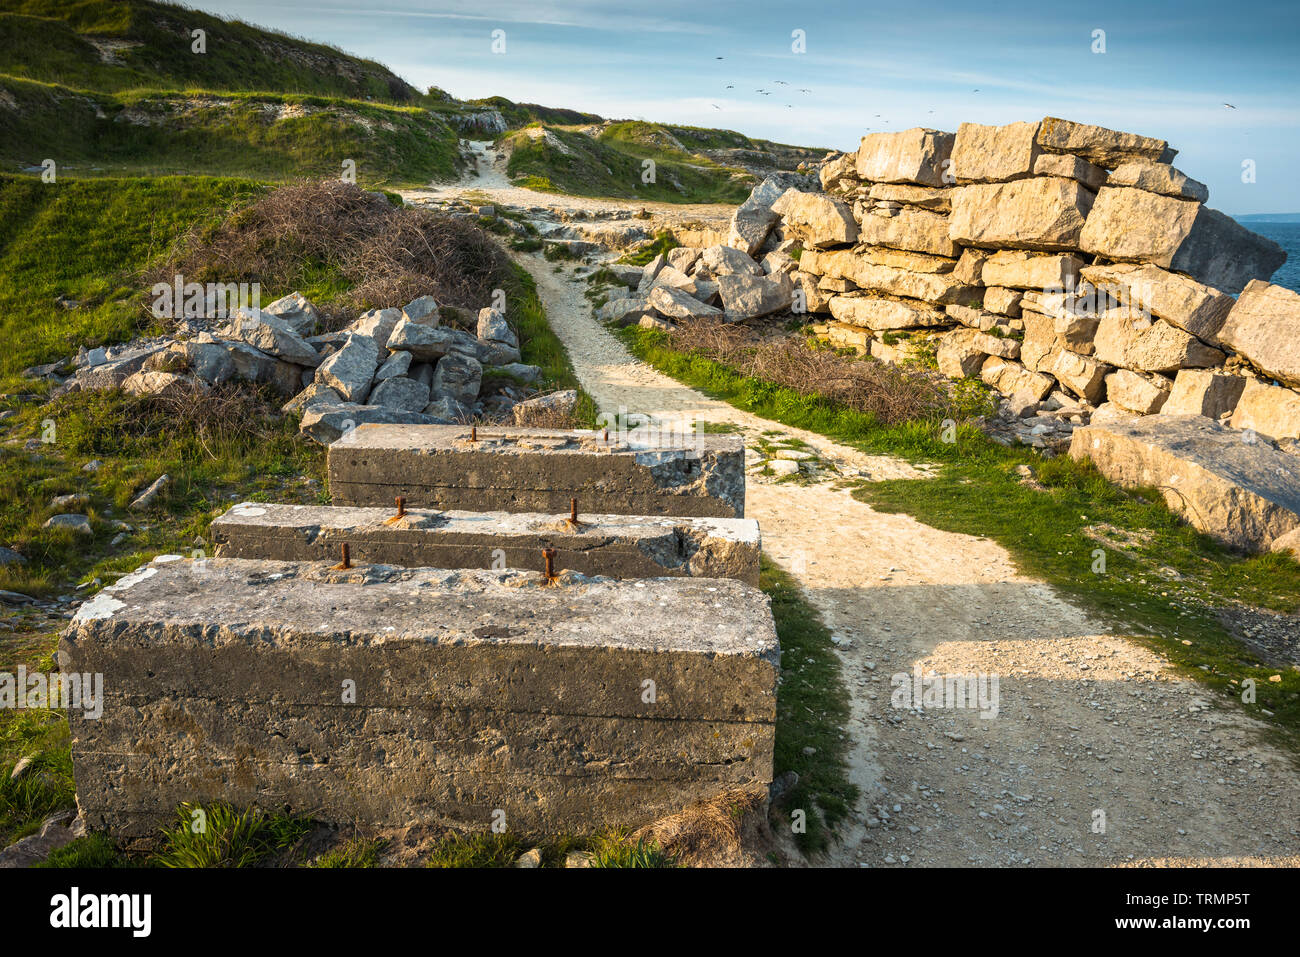 Remains of a disused stone quarry at Portland Bill on the Isle of Portland, Dorset, England, UK. Stock Photo